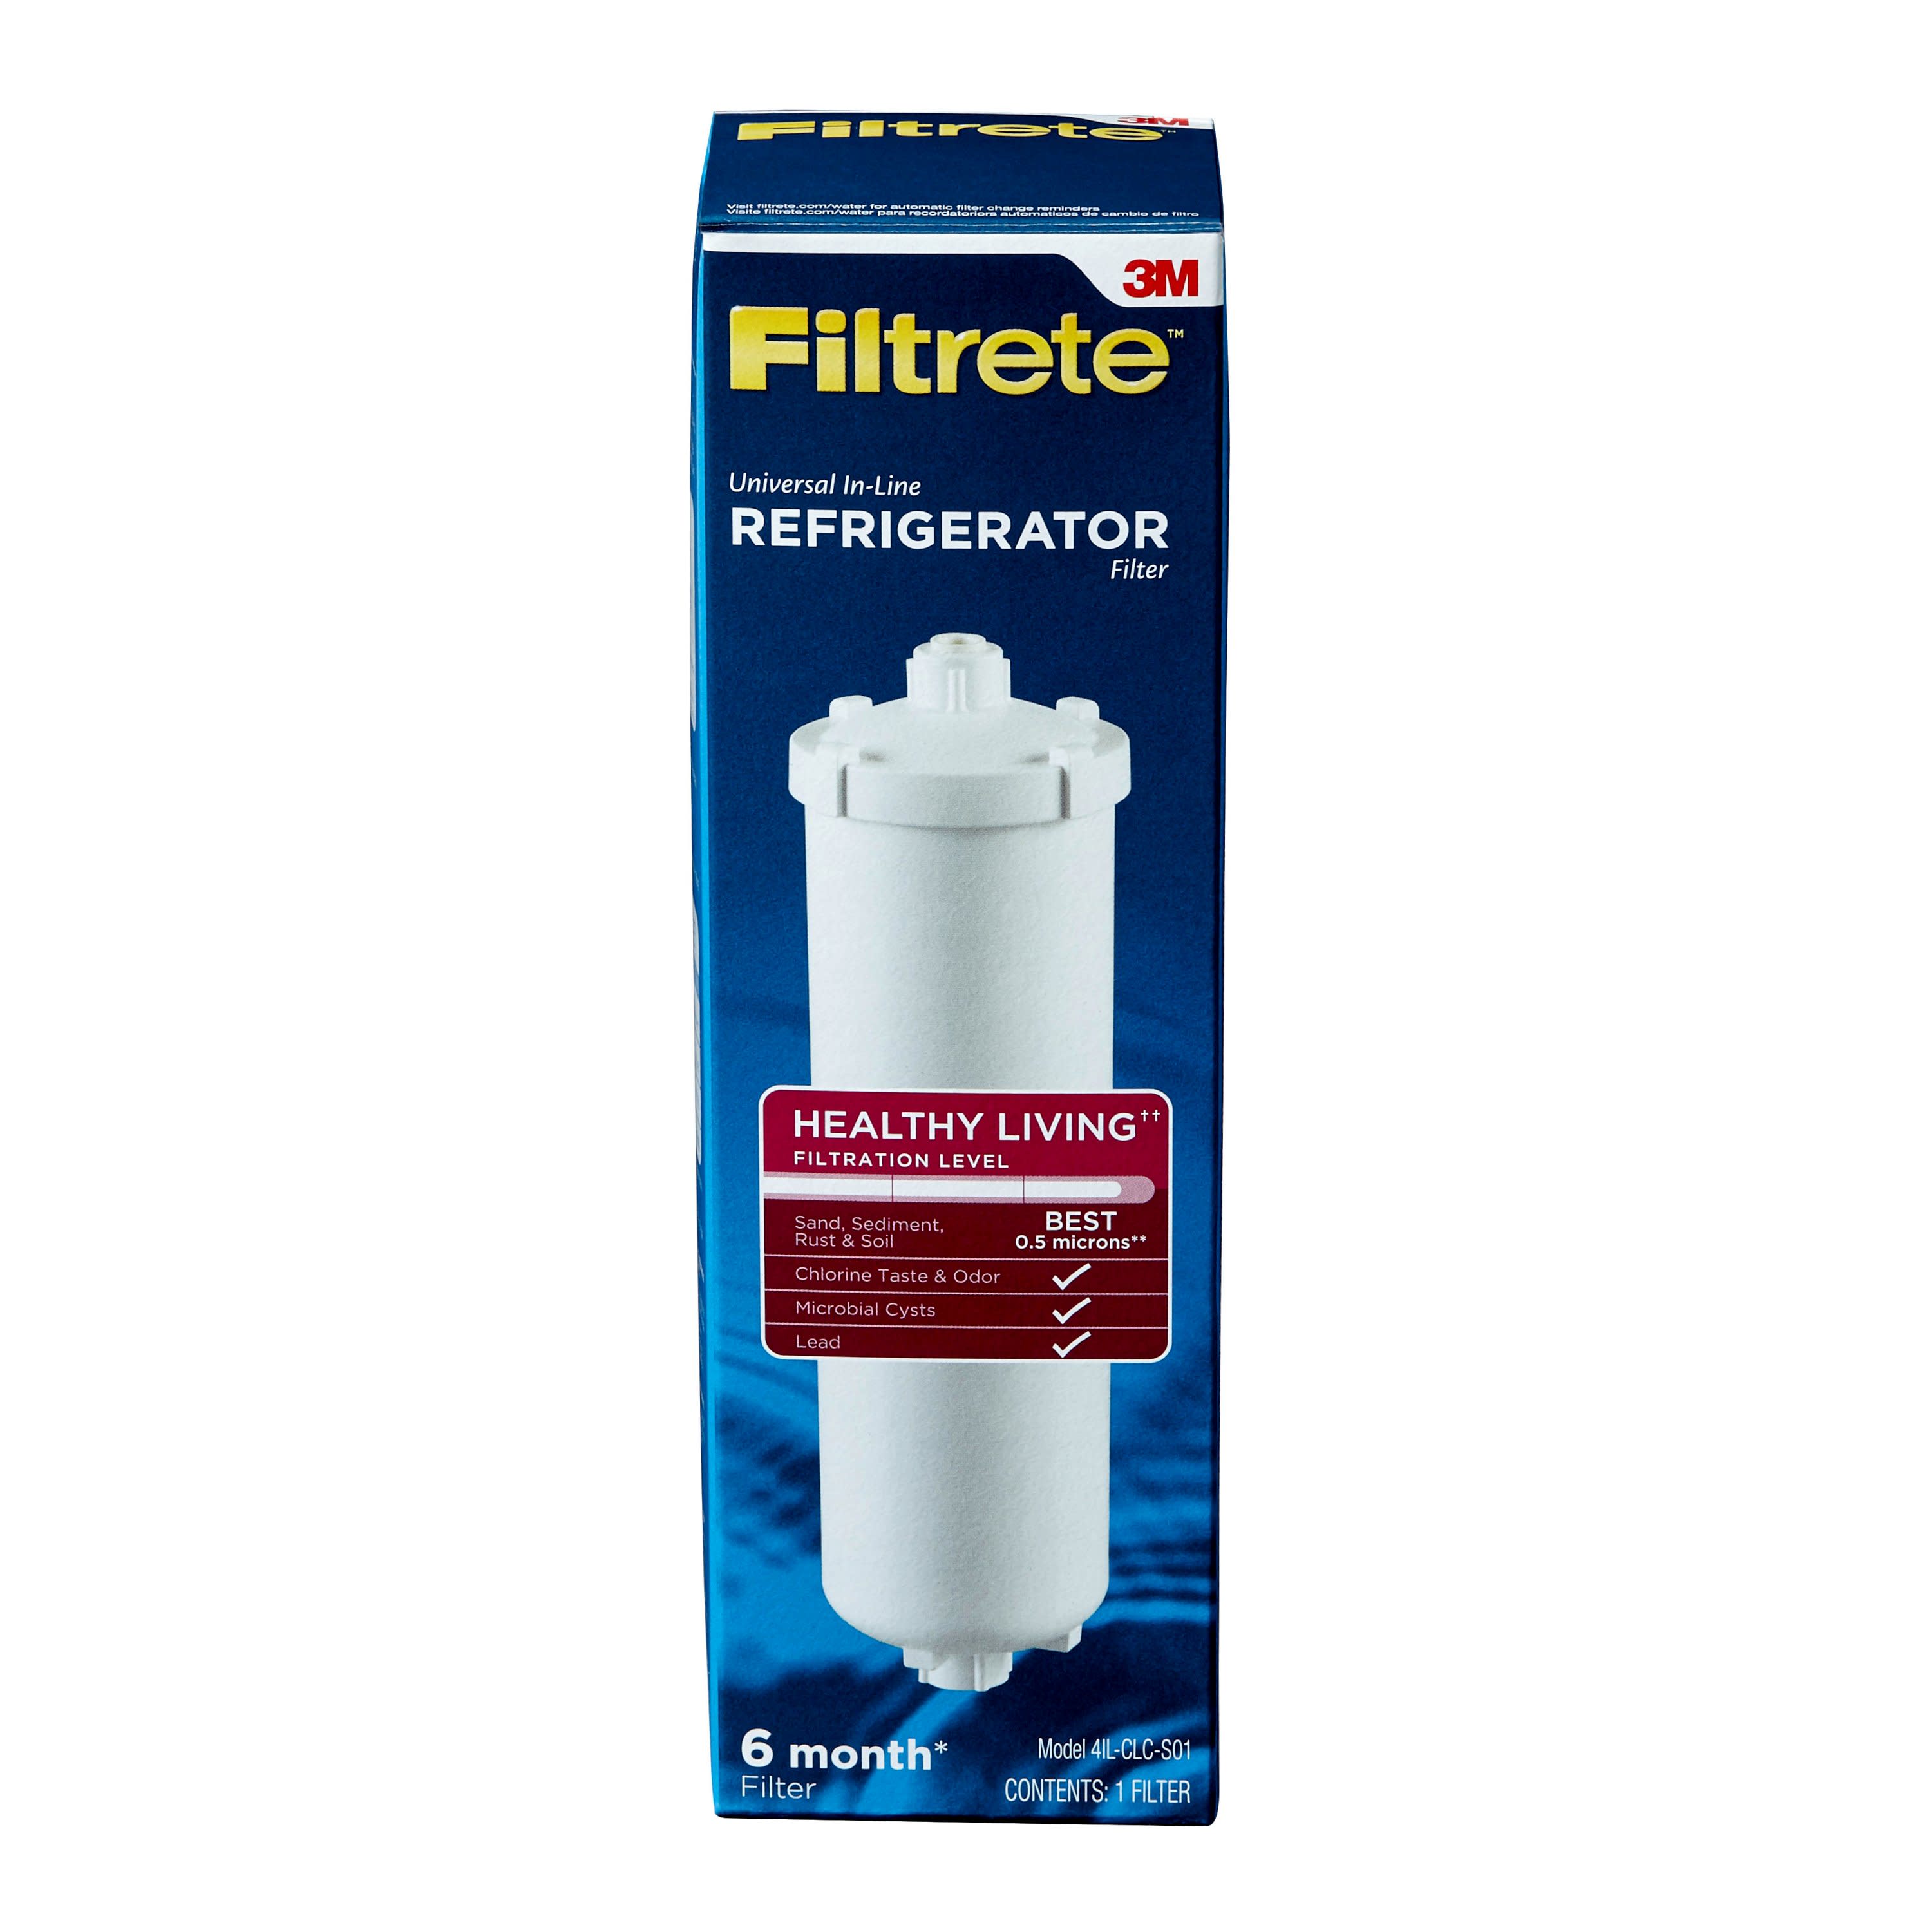 Filtrete 4IL-CLC-S01 Universal In-Line Refrigerator Water Filter Cartridge - image 1 of 2